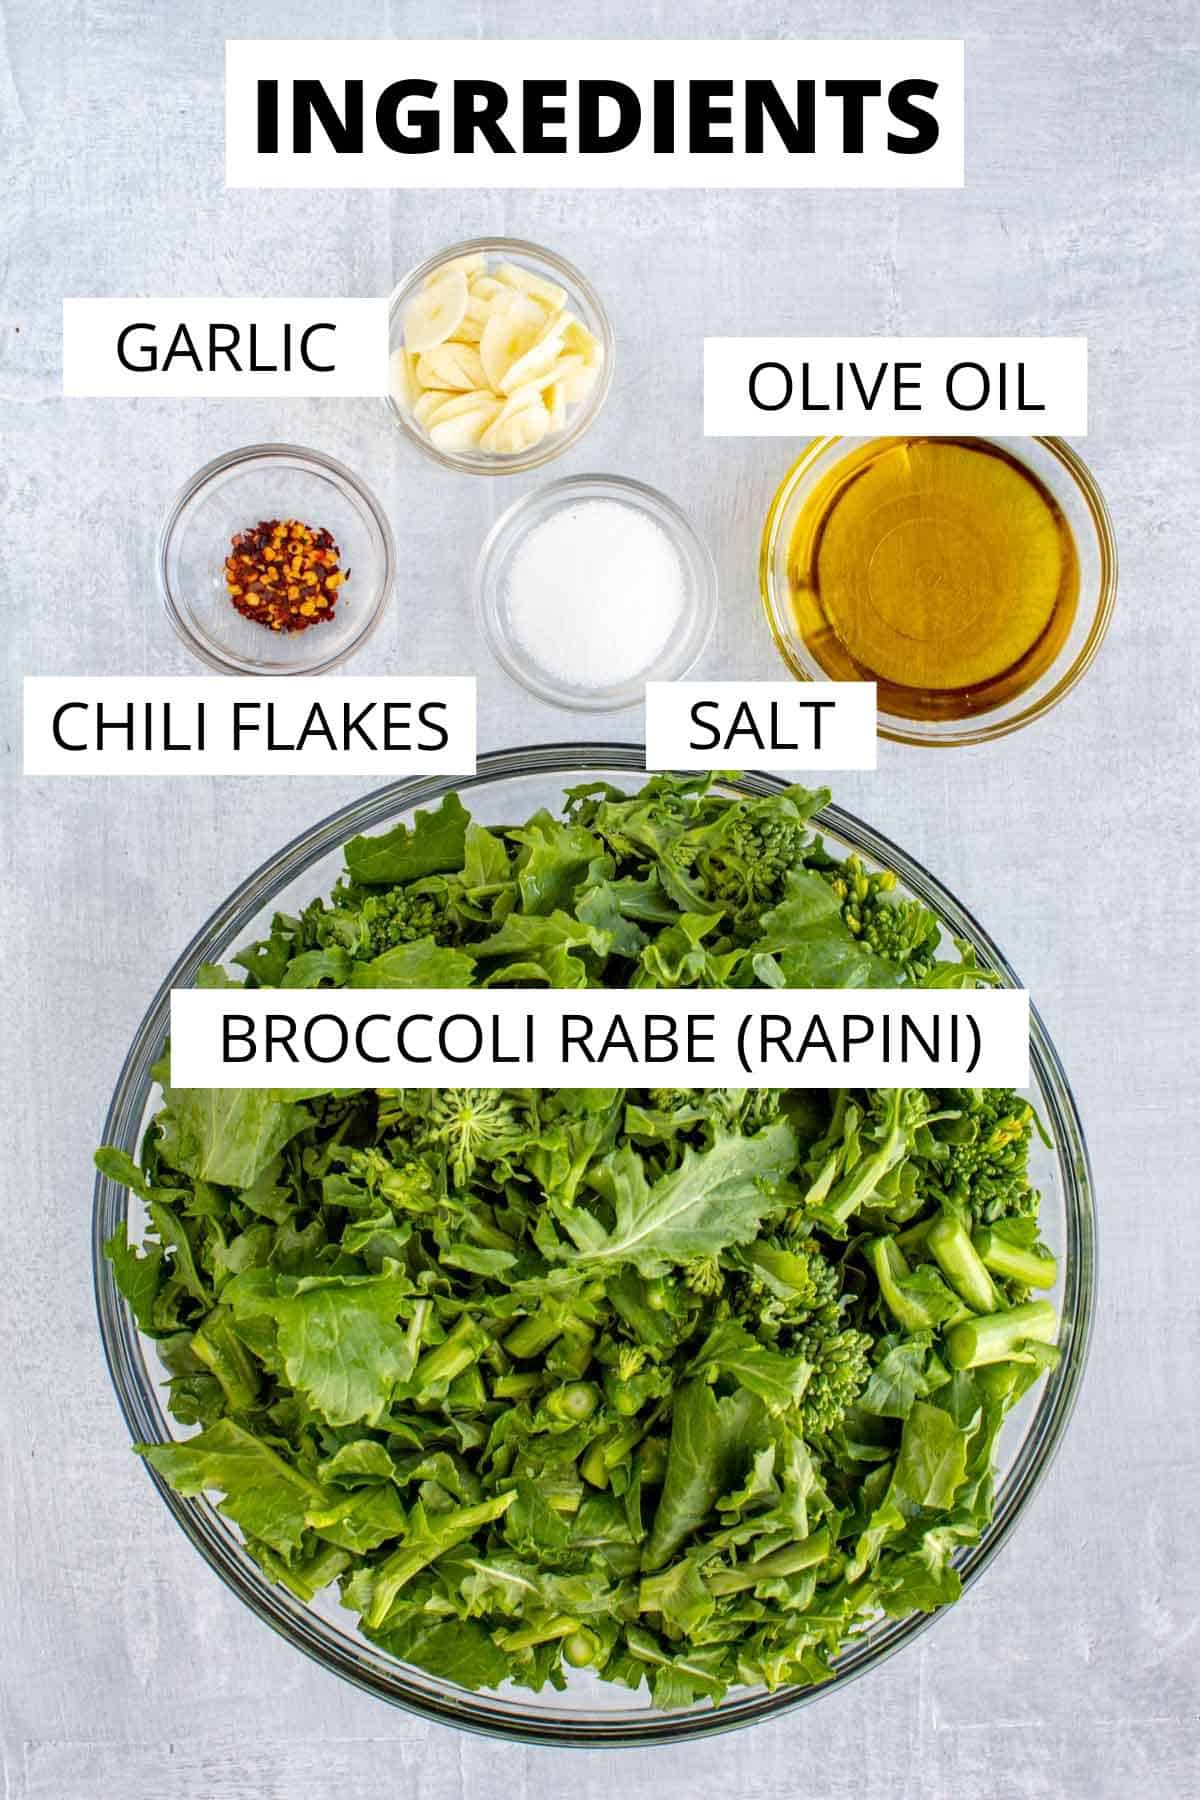 Ingredients for sautéed broccoli rabe with garlic and oil.